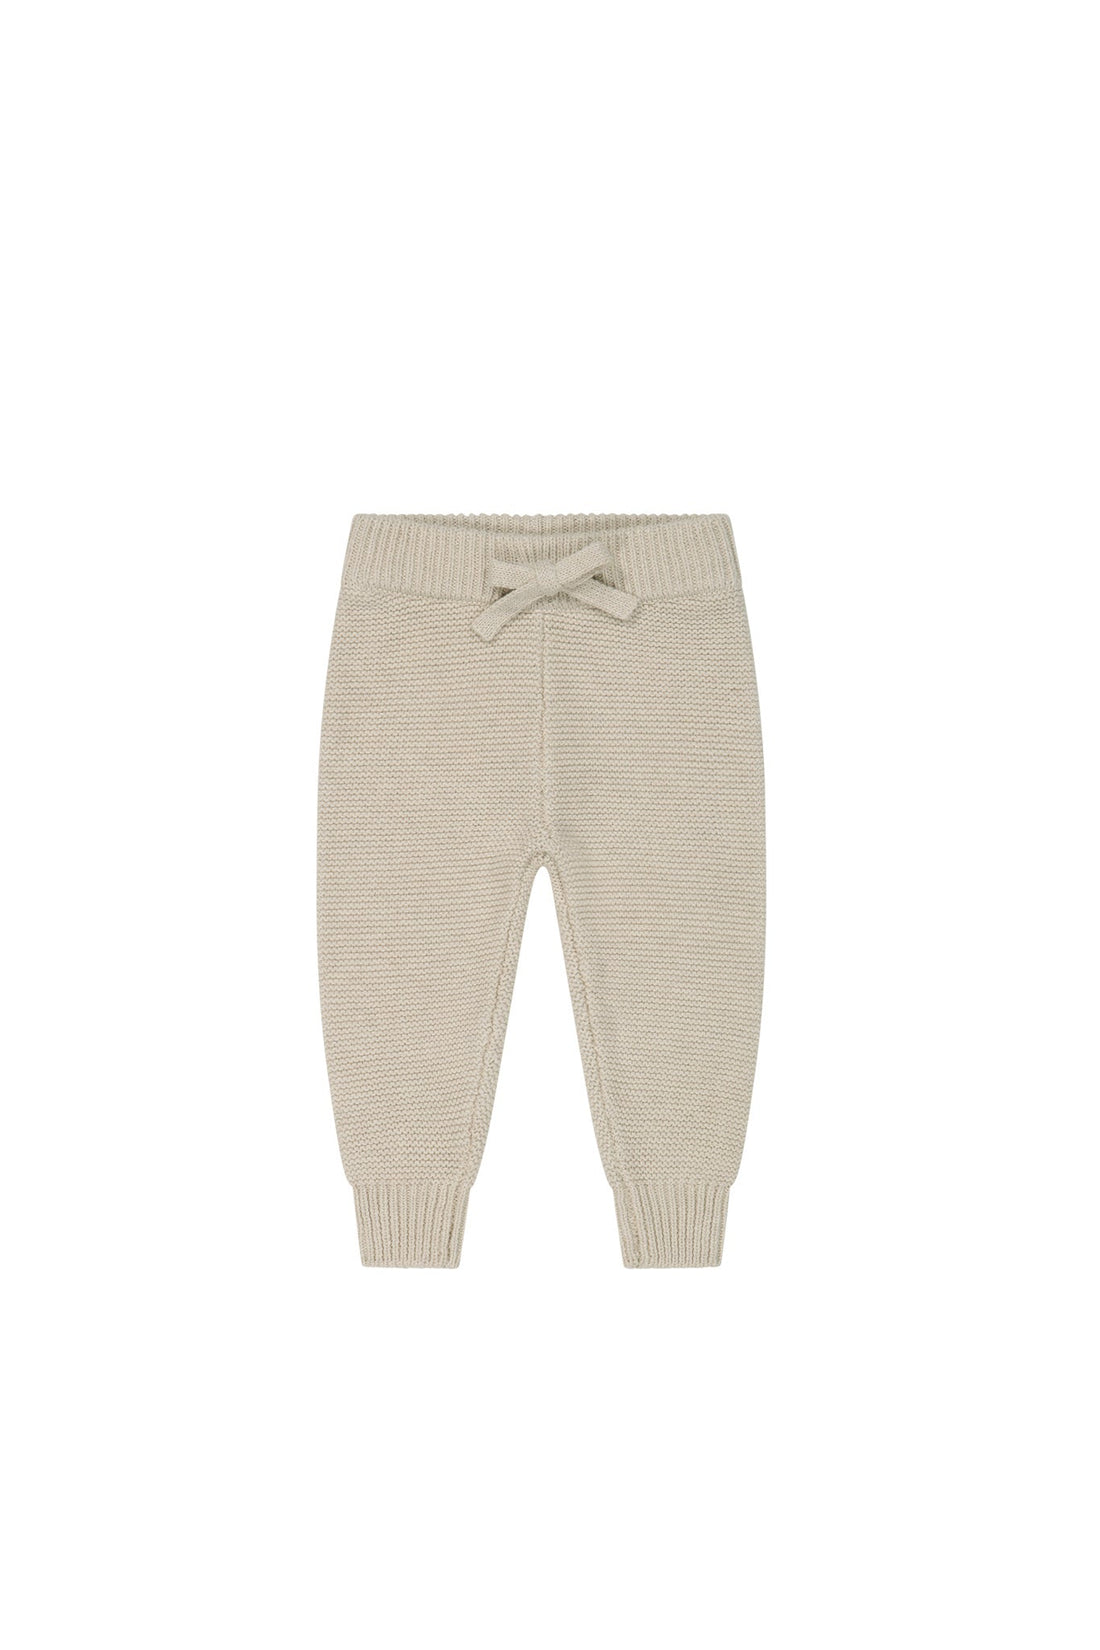 Ethan Pant - Skimming Stone Marle Childrens Pant from Jamie Kay USA